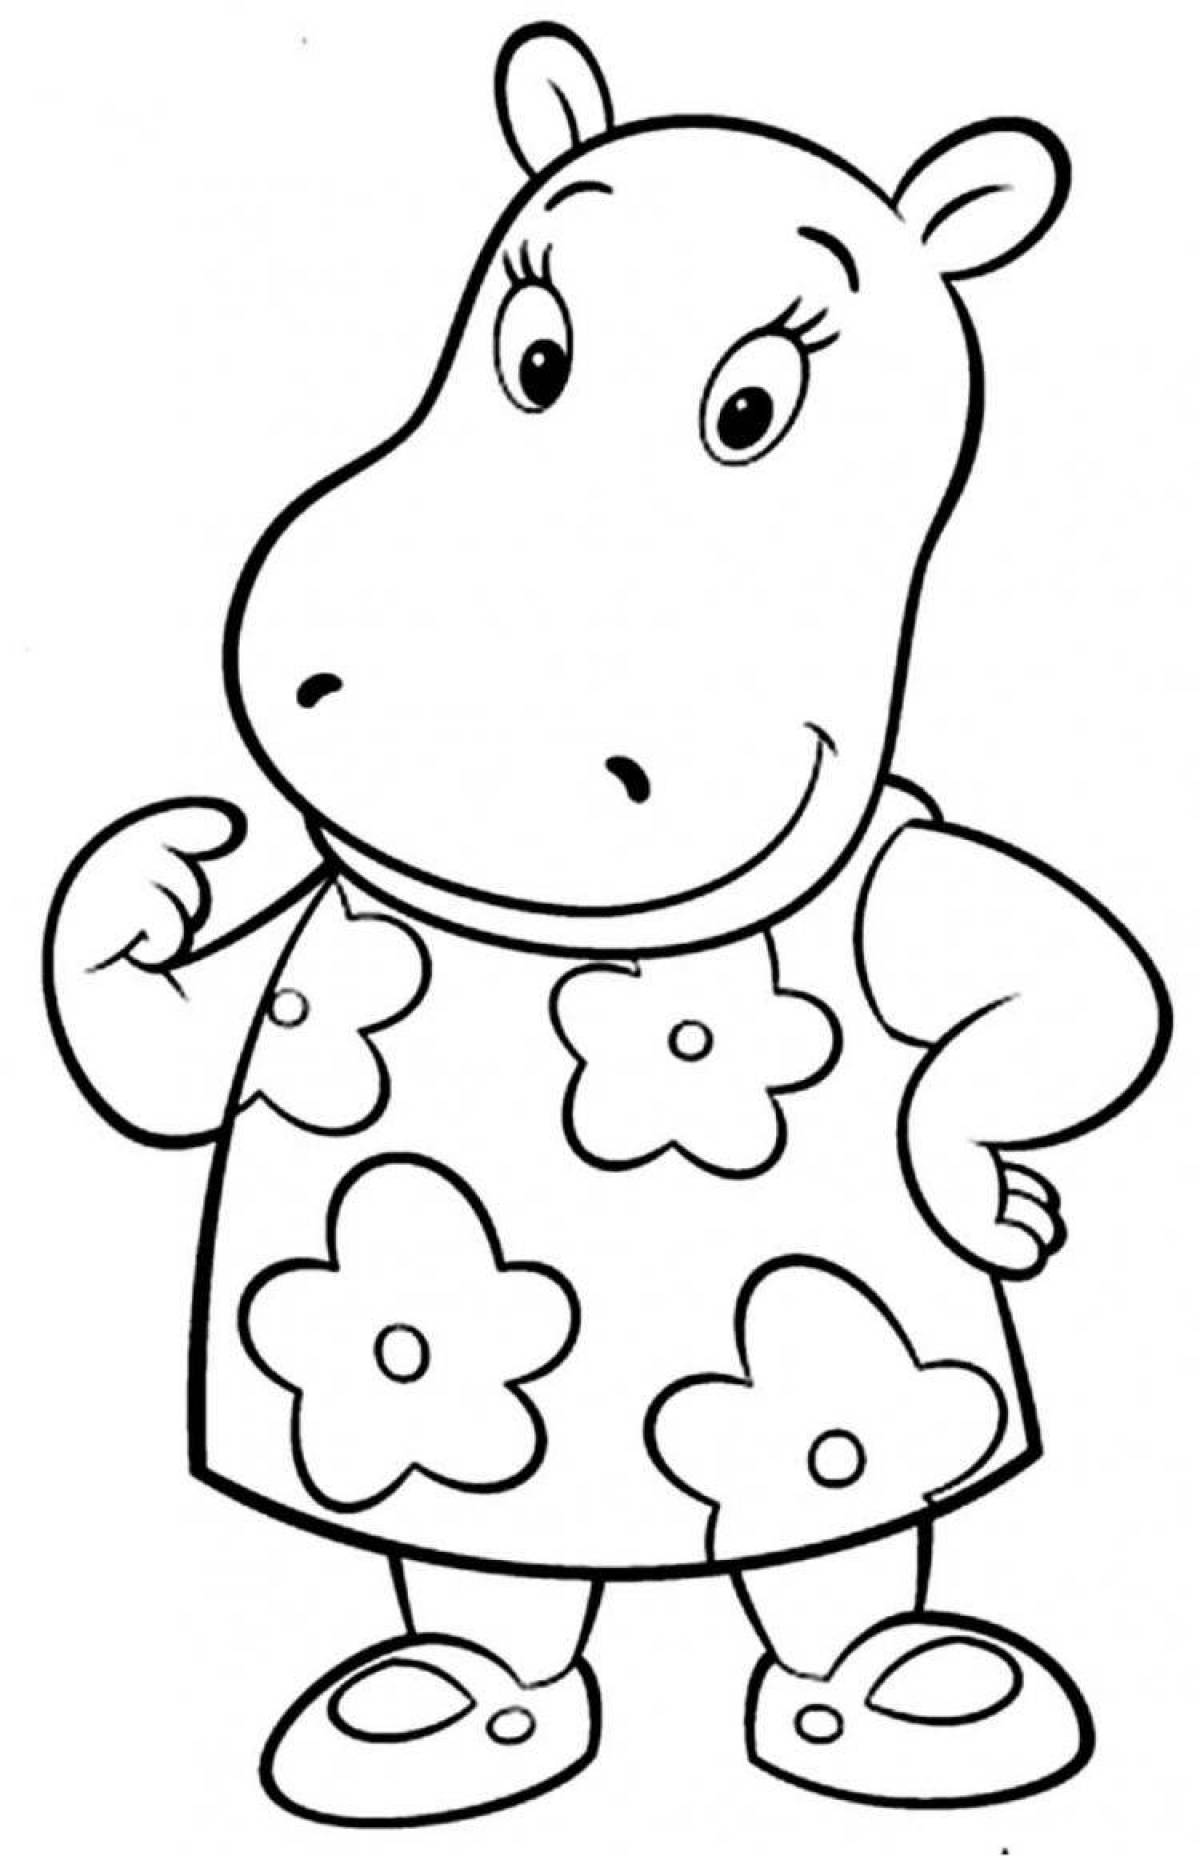 Hippo coloring page